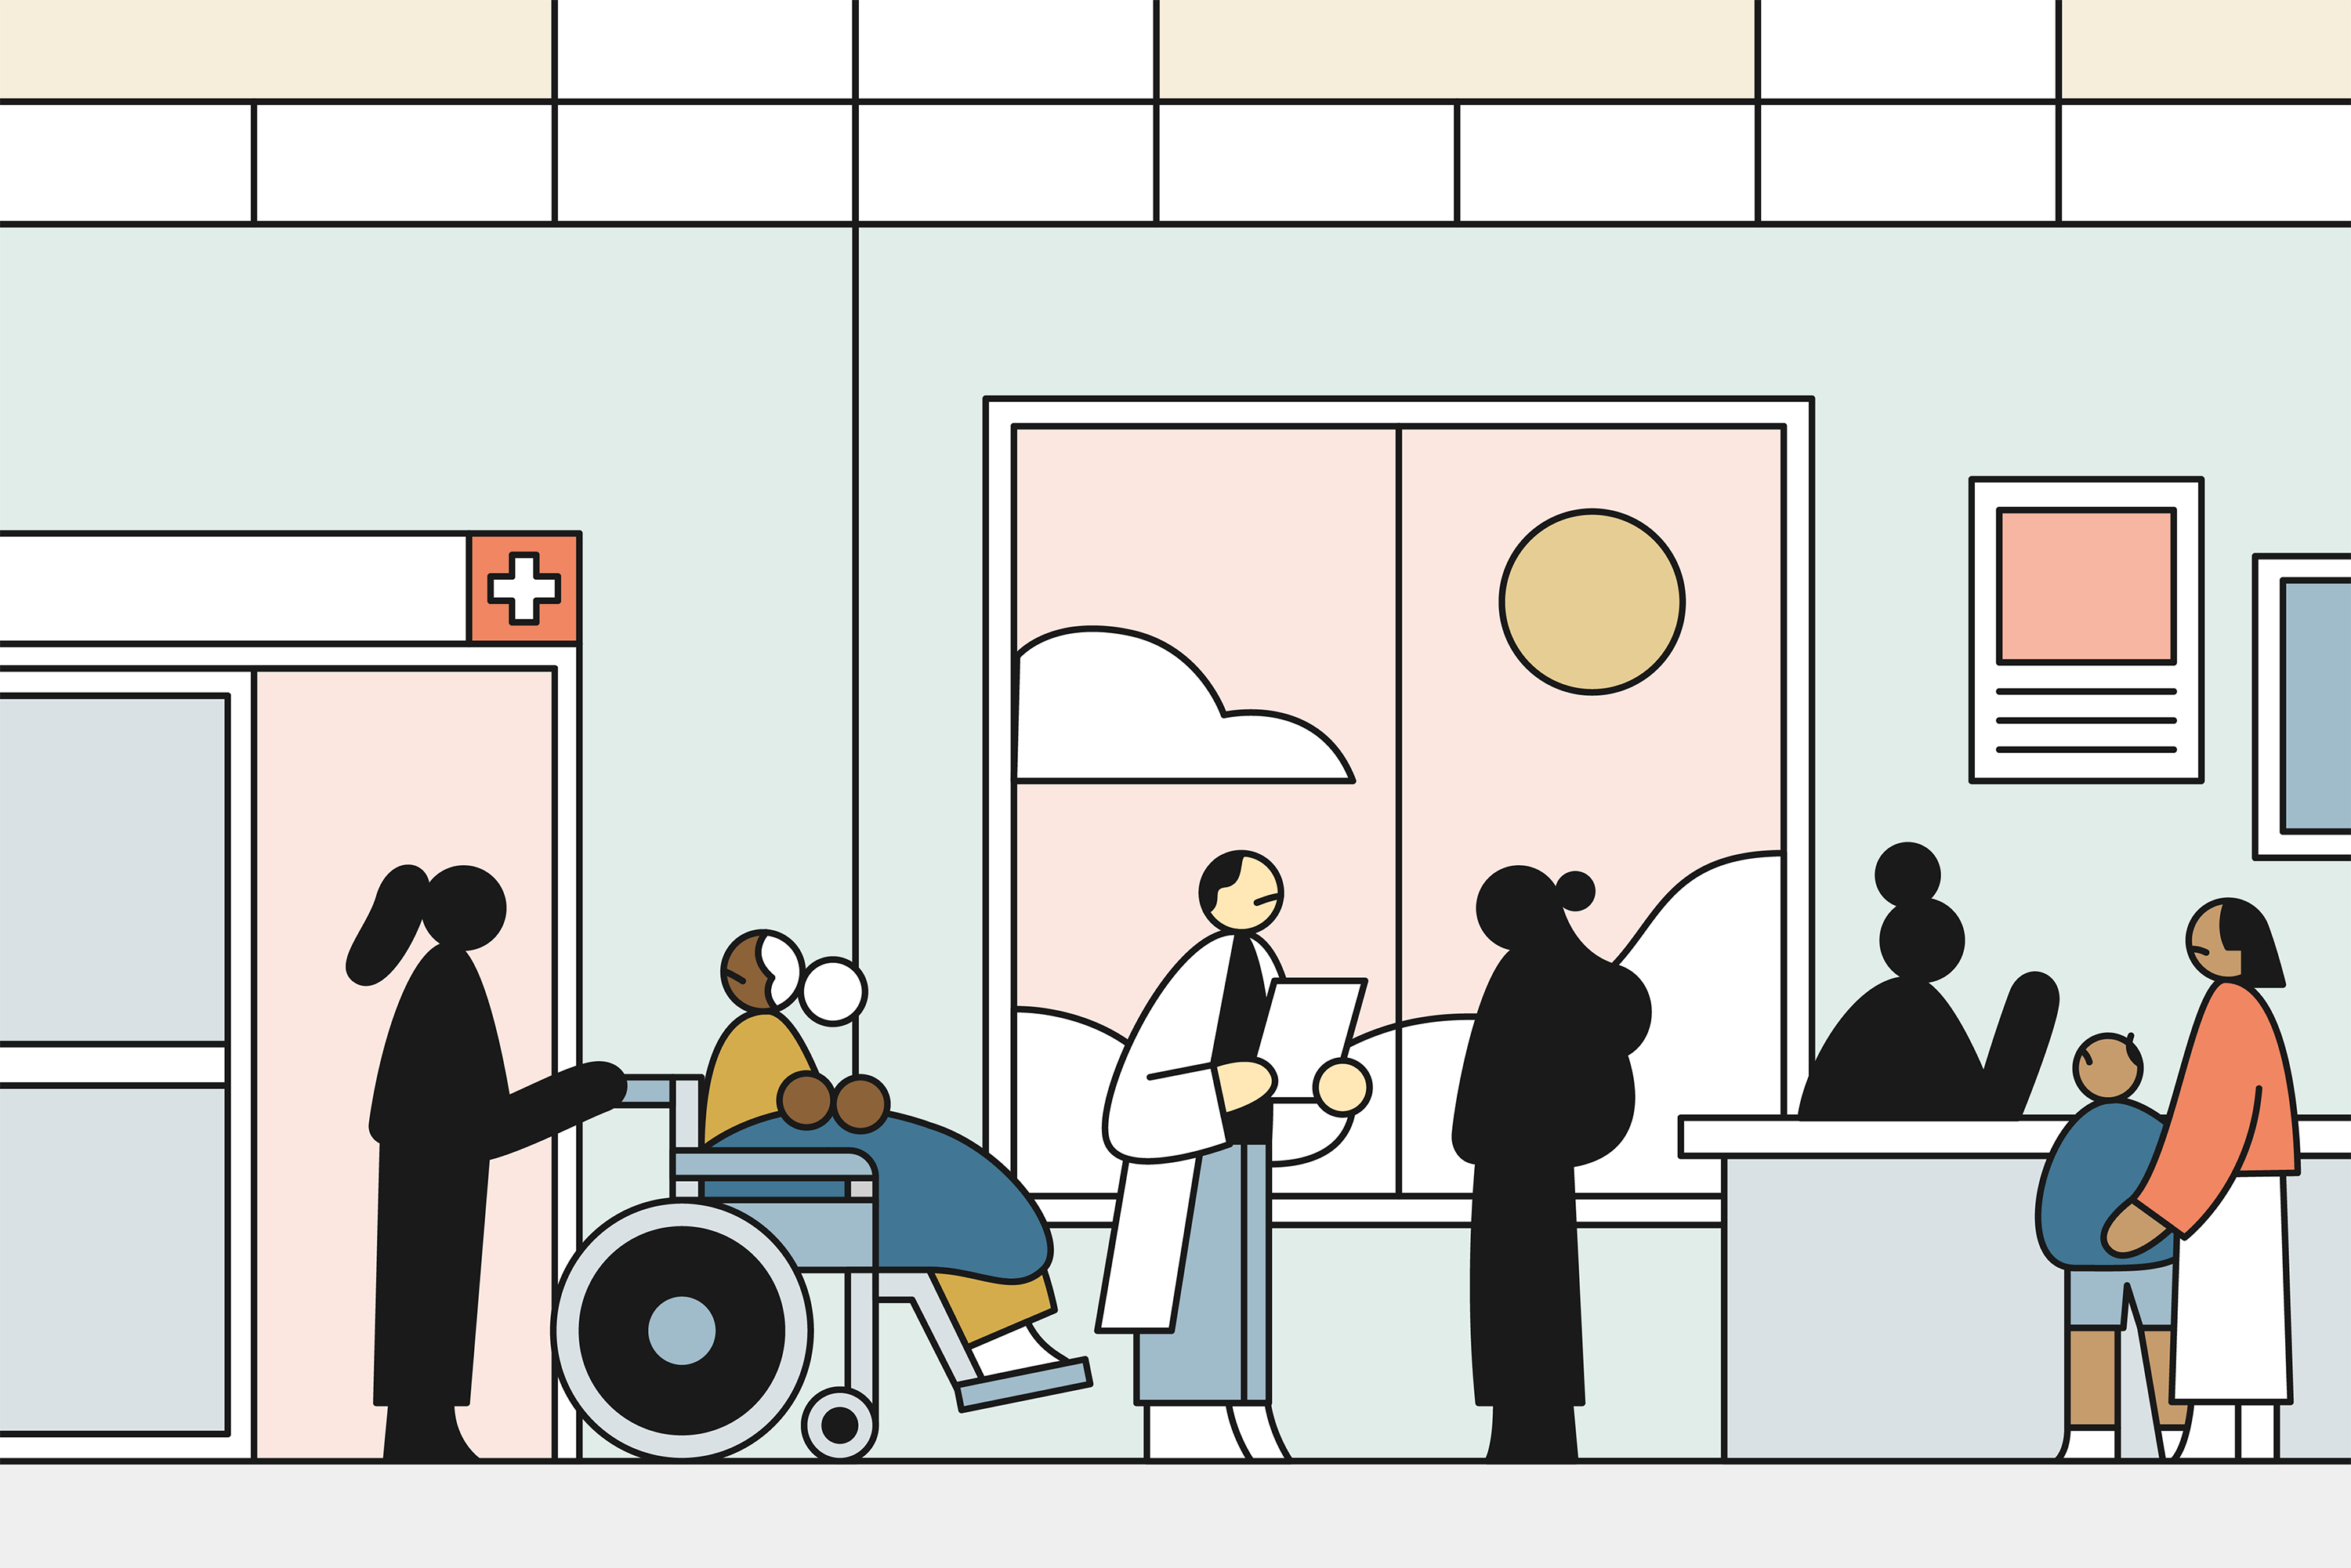 Hospital Waiting Room Conceptual Architecture Clean Stock Illustration  46987615 | Shutterstock